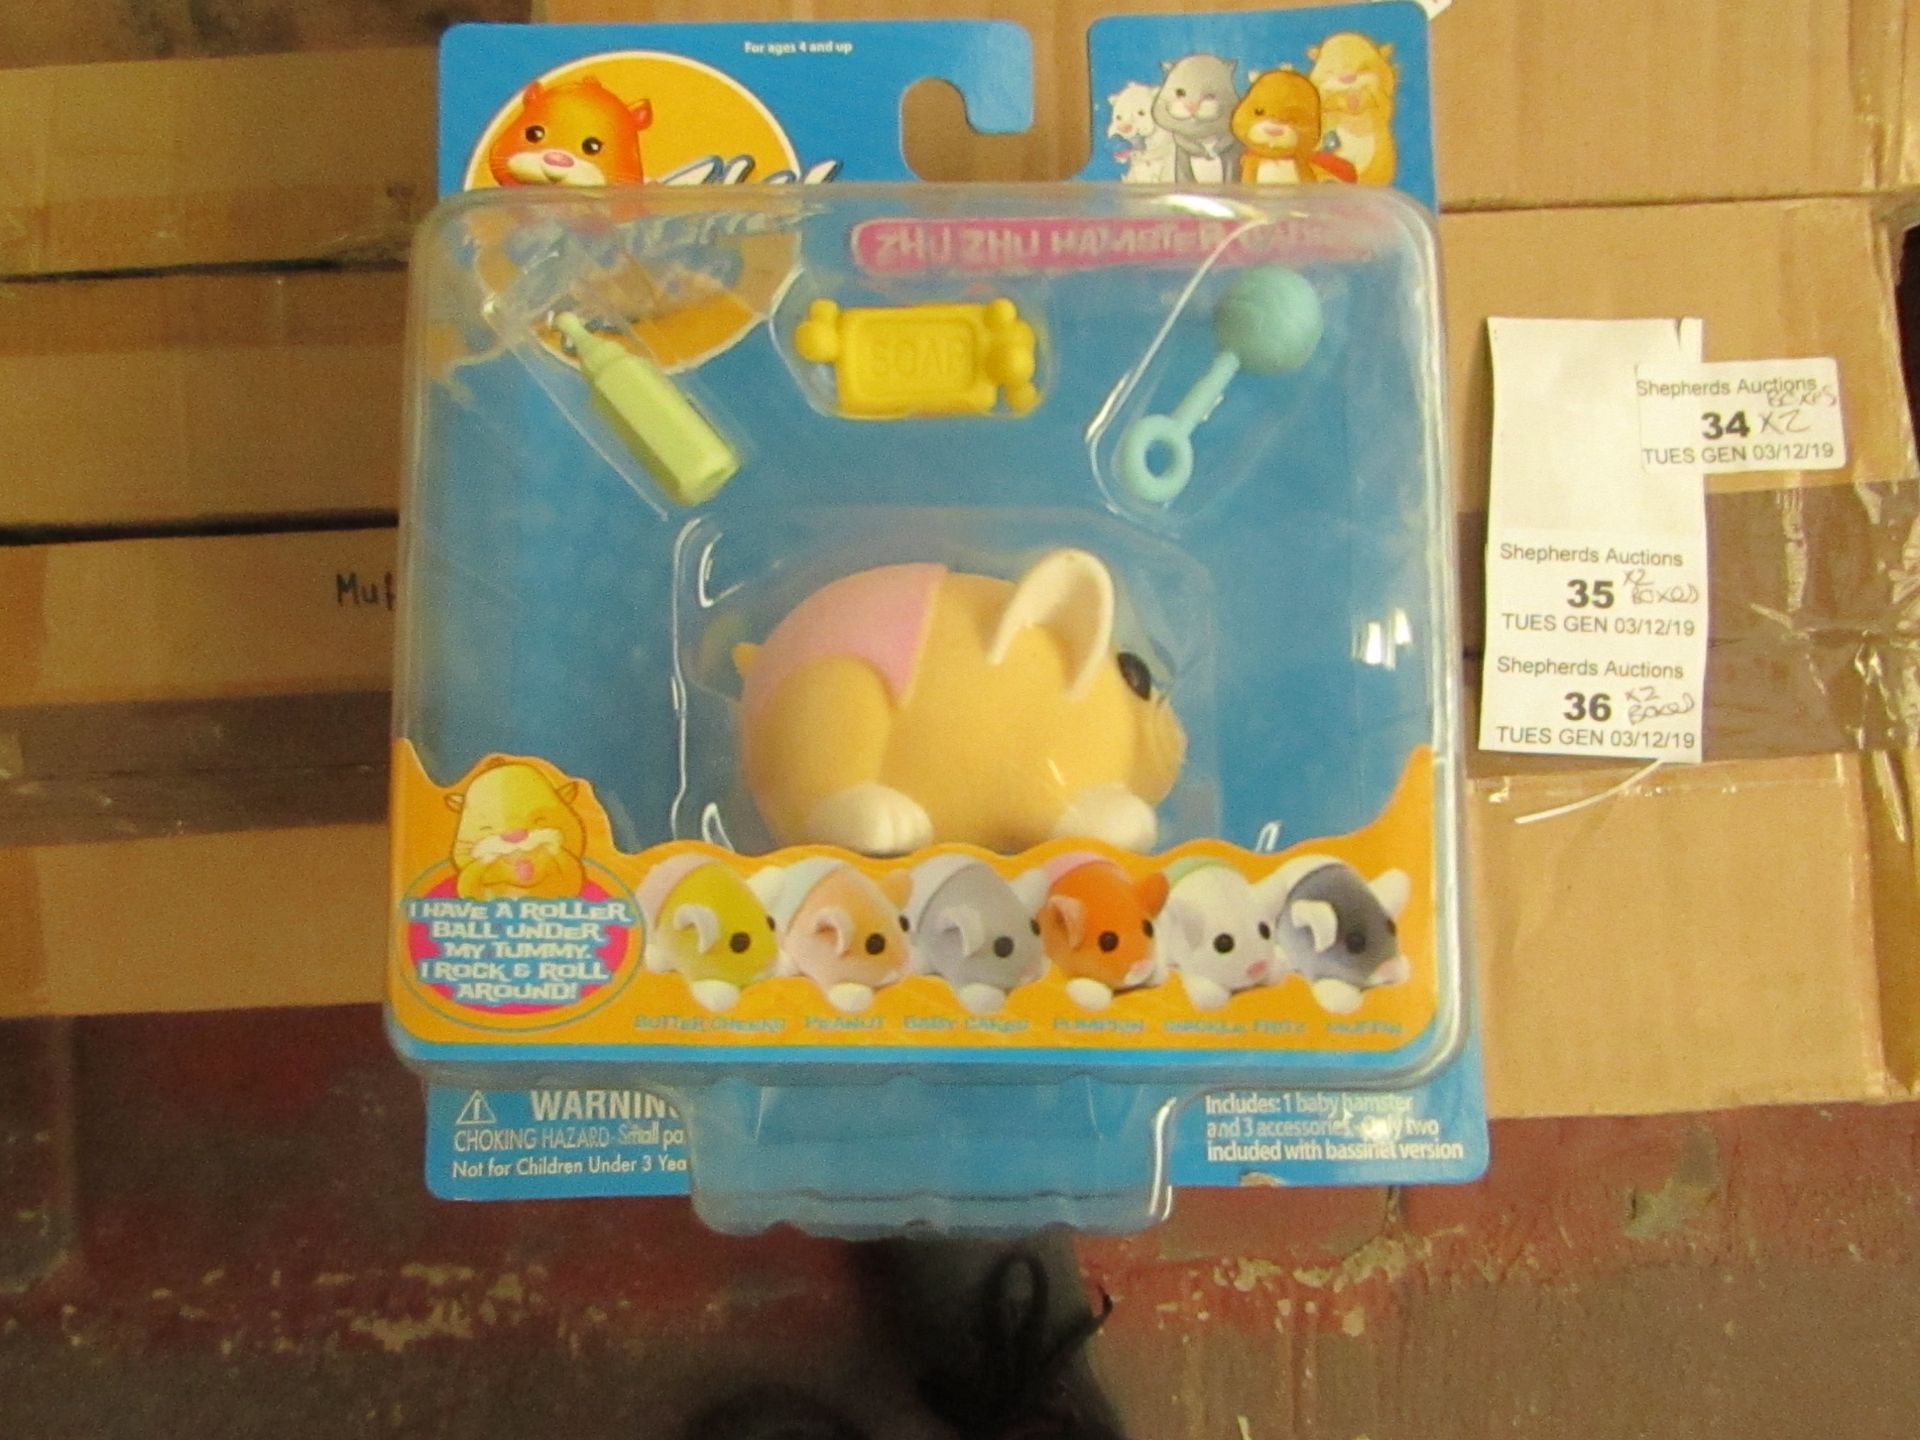 Box of 8 Zhu Zhu Hamster Babies. Includes Baby Hamster & 3 accessories. New & Packaged. Ideal